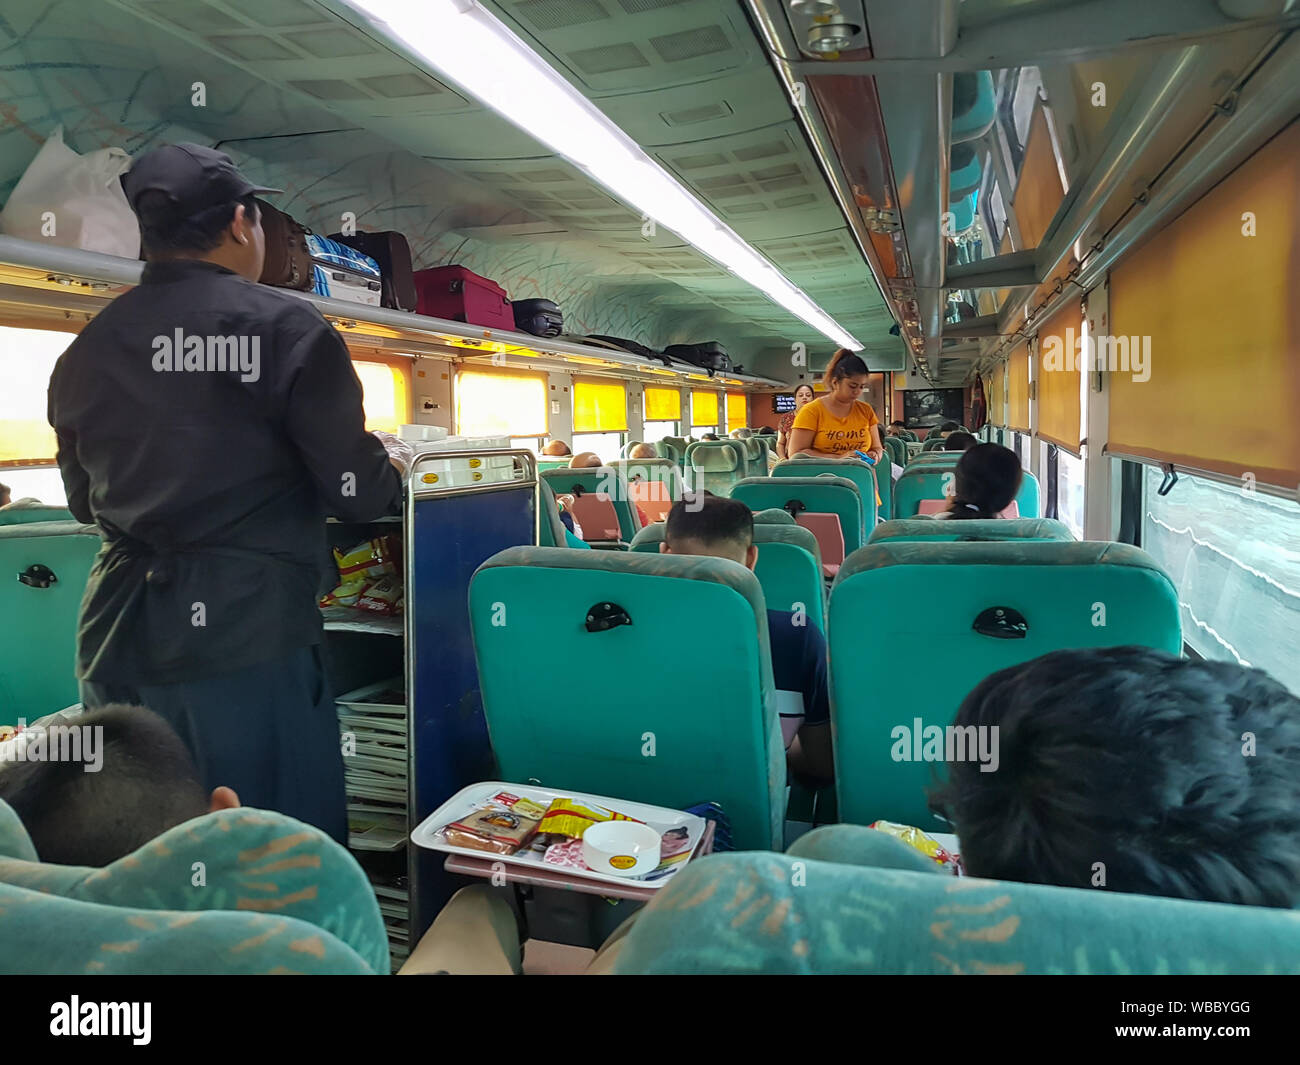 Agra, India - August 13, 2019: Food service from Indian Railways on Shatabdi Express train Stock Photo